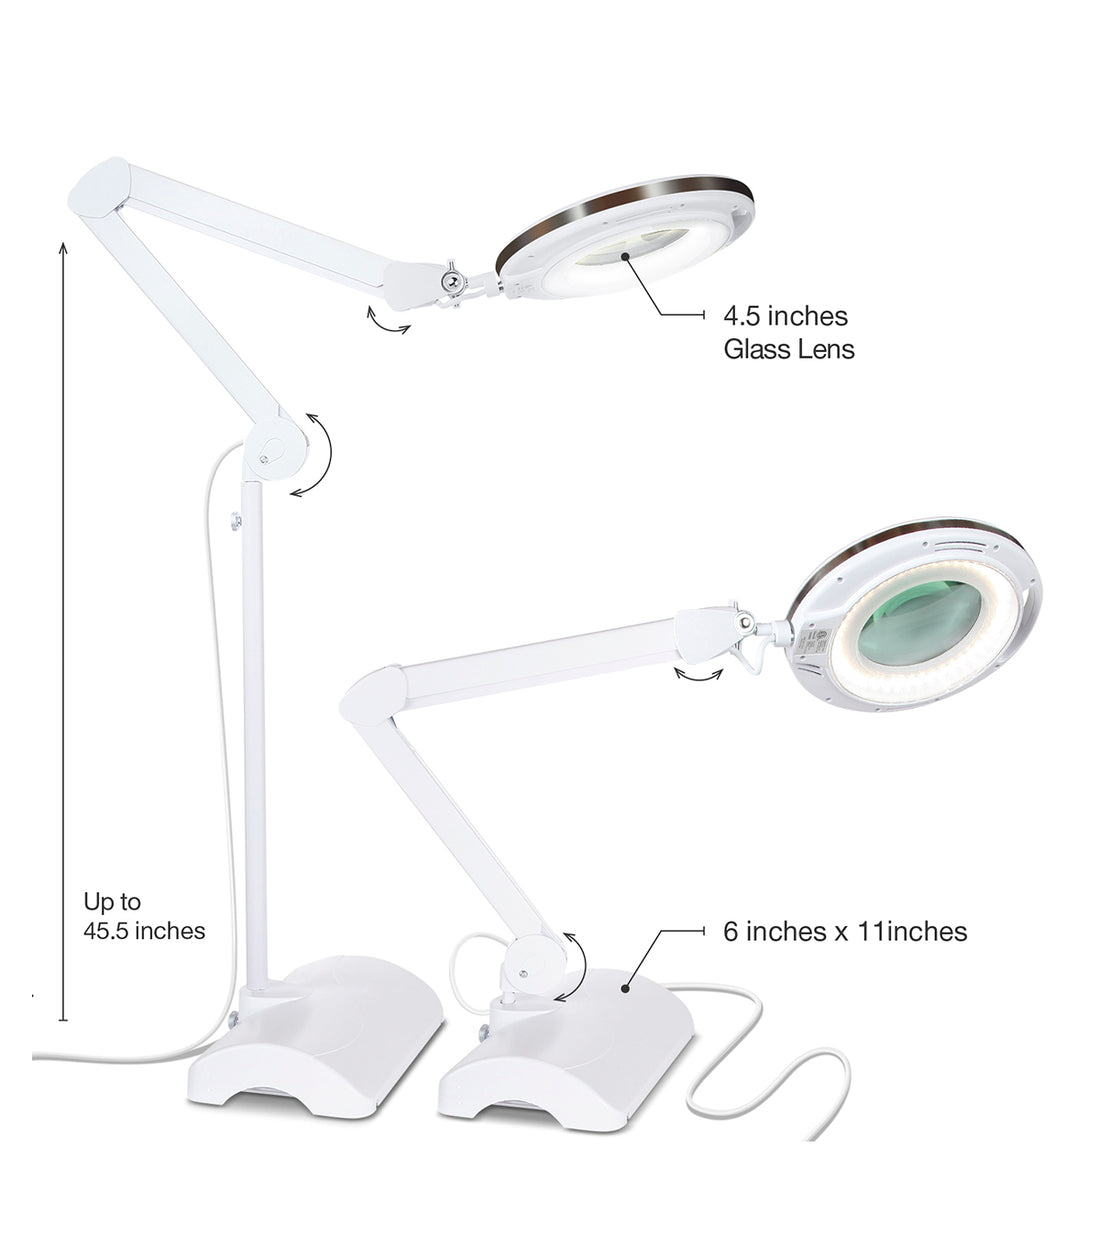 LED Magnifying Glass Light w/ Stand For Estheticians, Crafts & Sewing